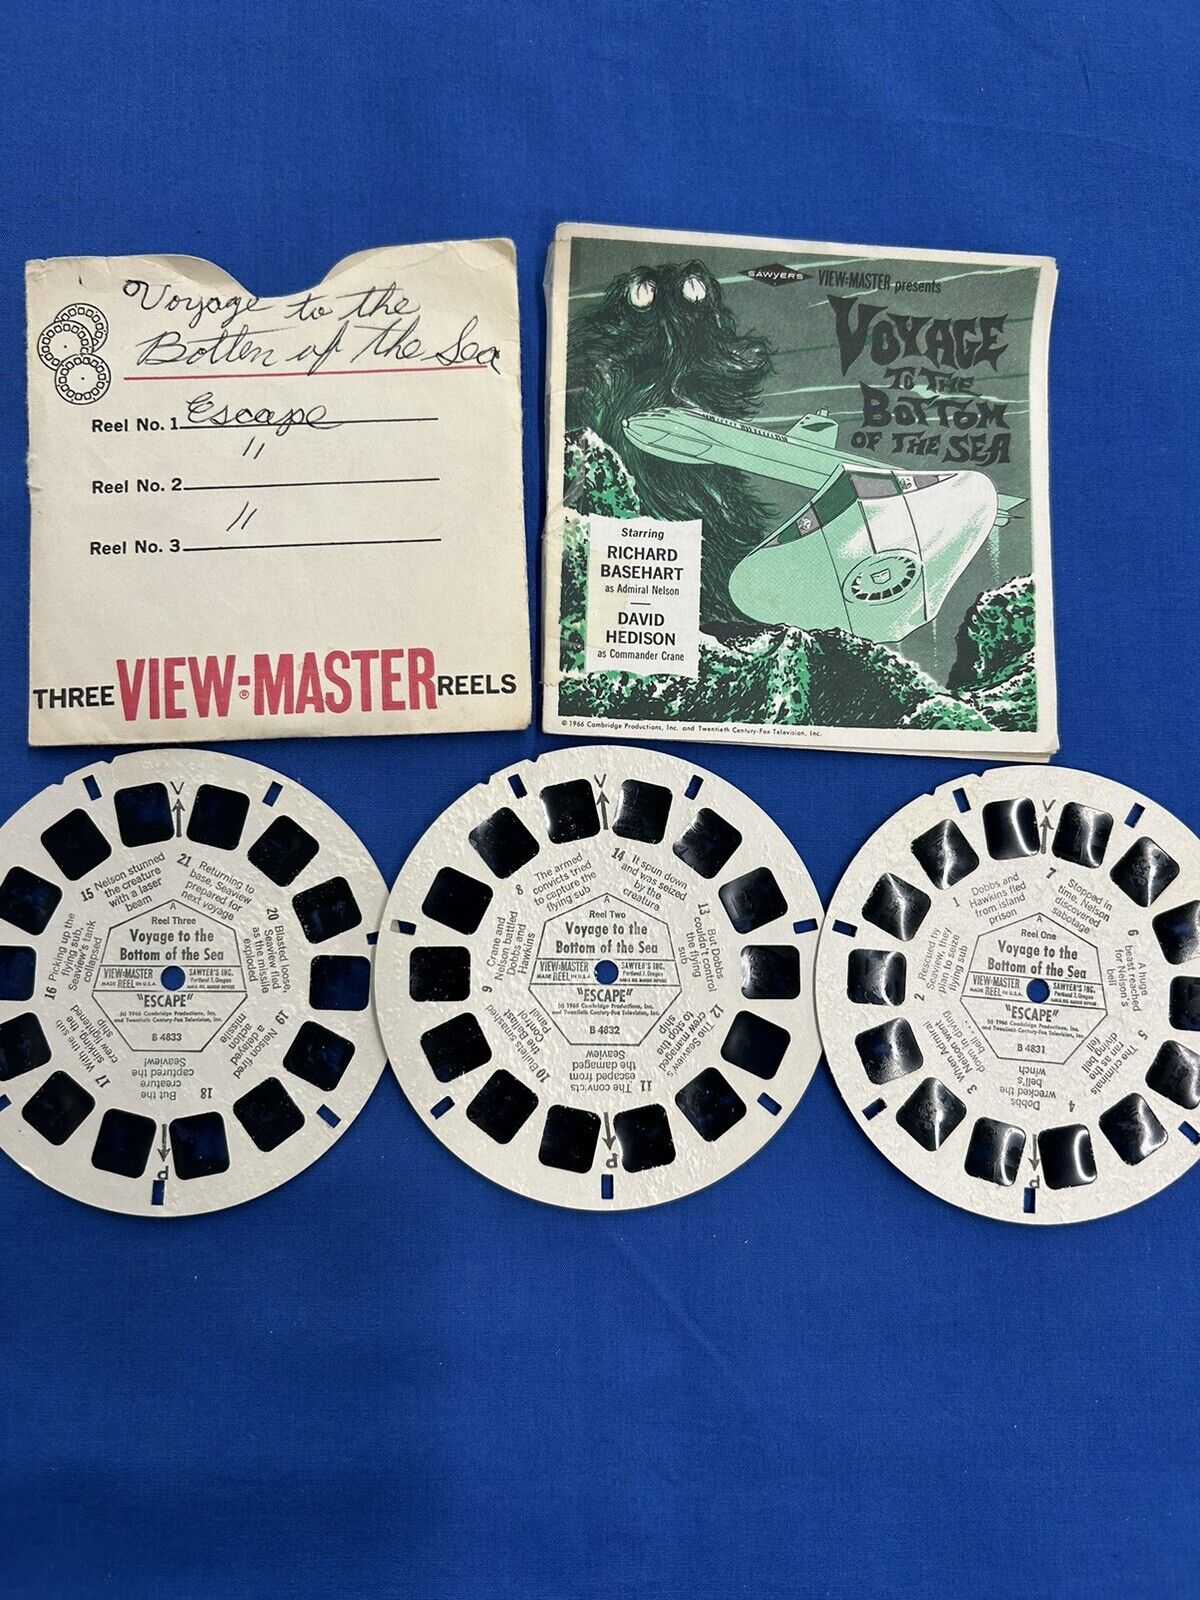 Voyage To The Bottom Of The Sea Escape 3 Viewmaster Reels